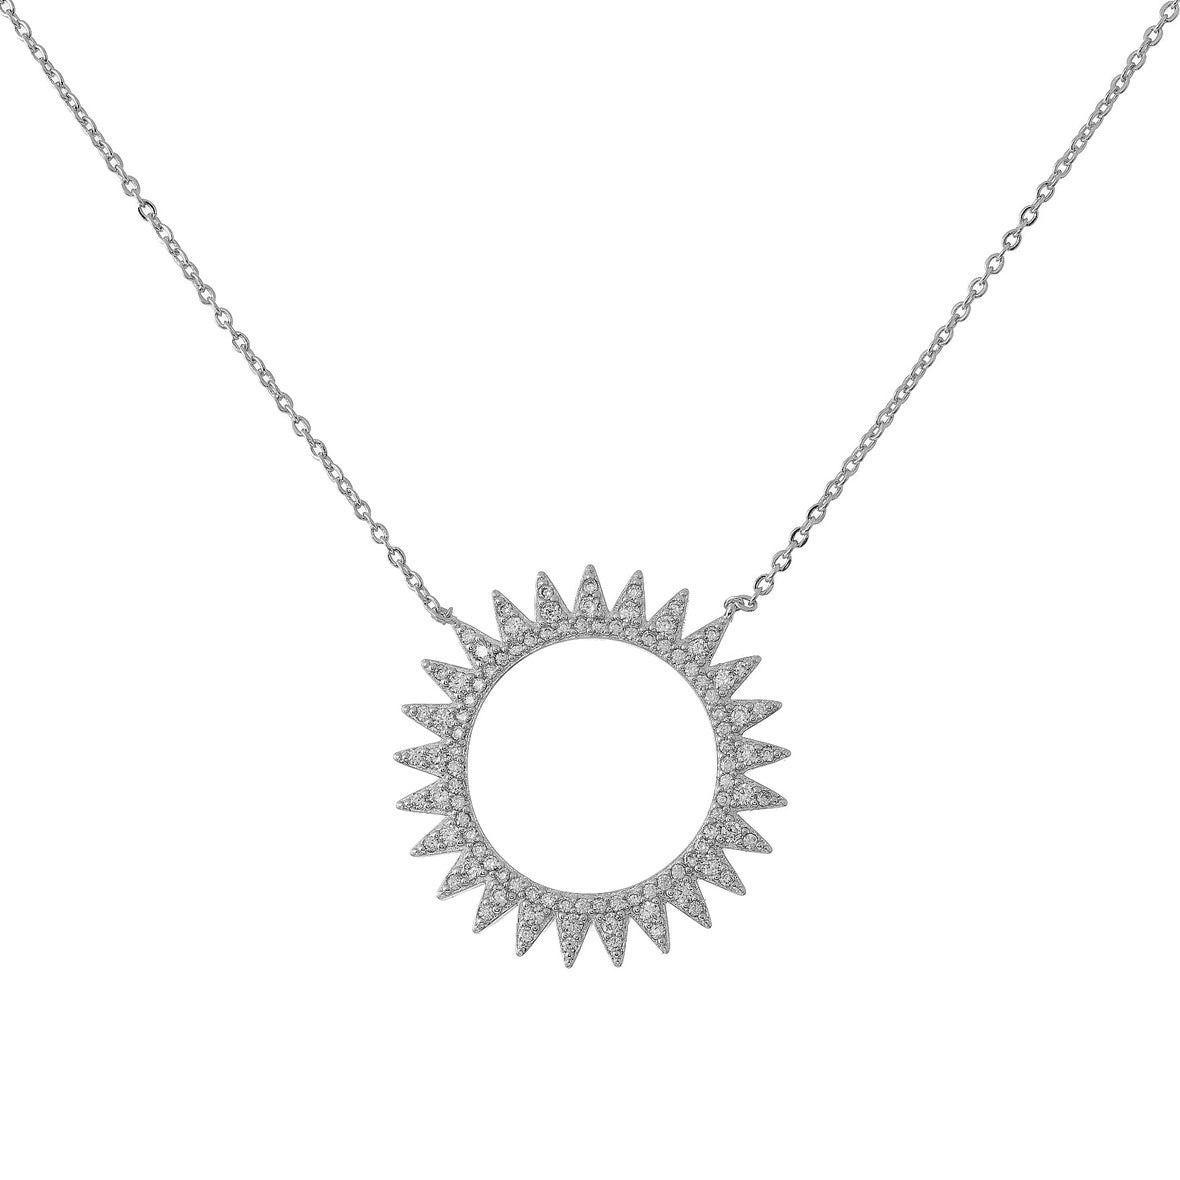 The Bright Sun Statement Casual Necklace